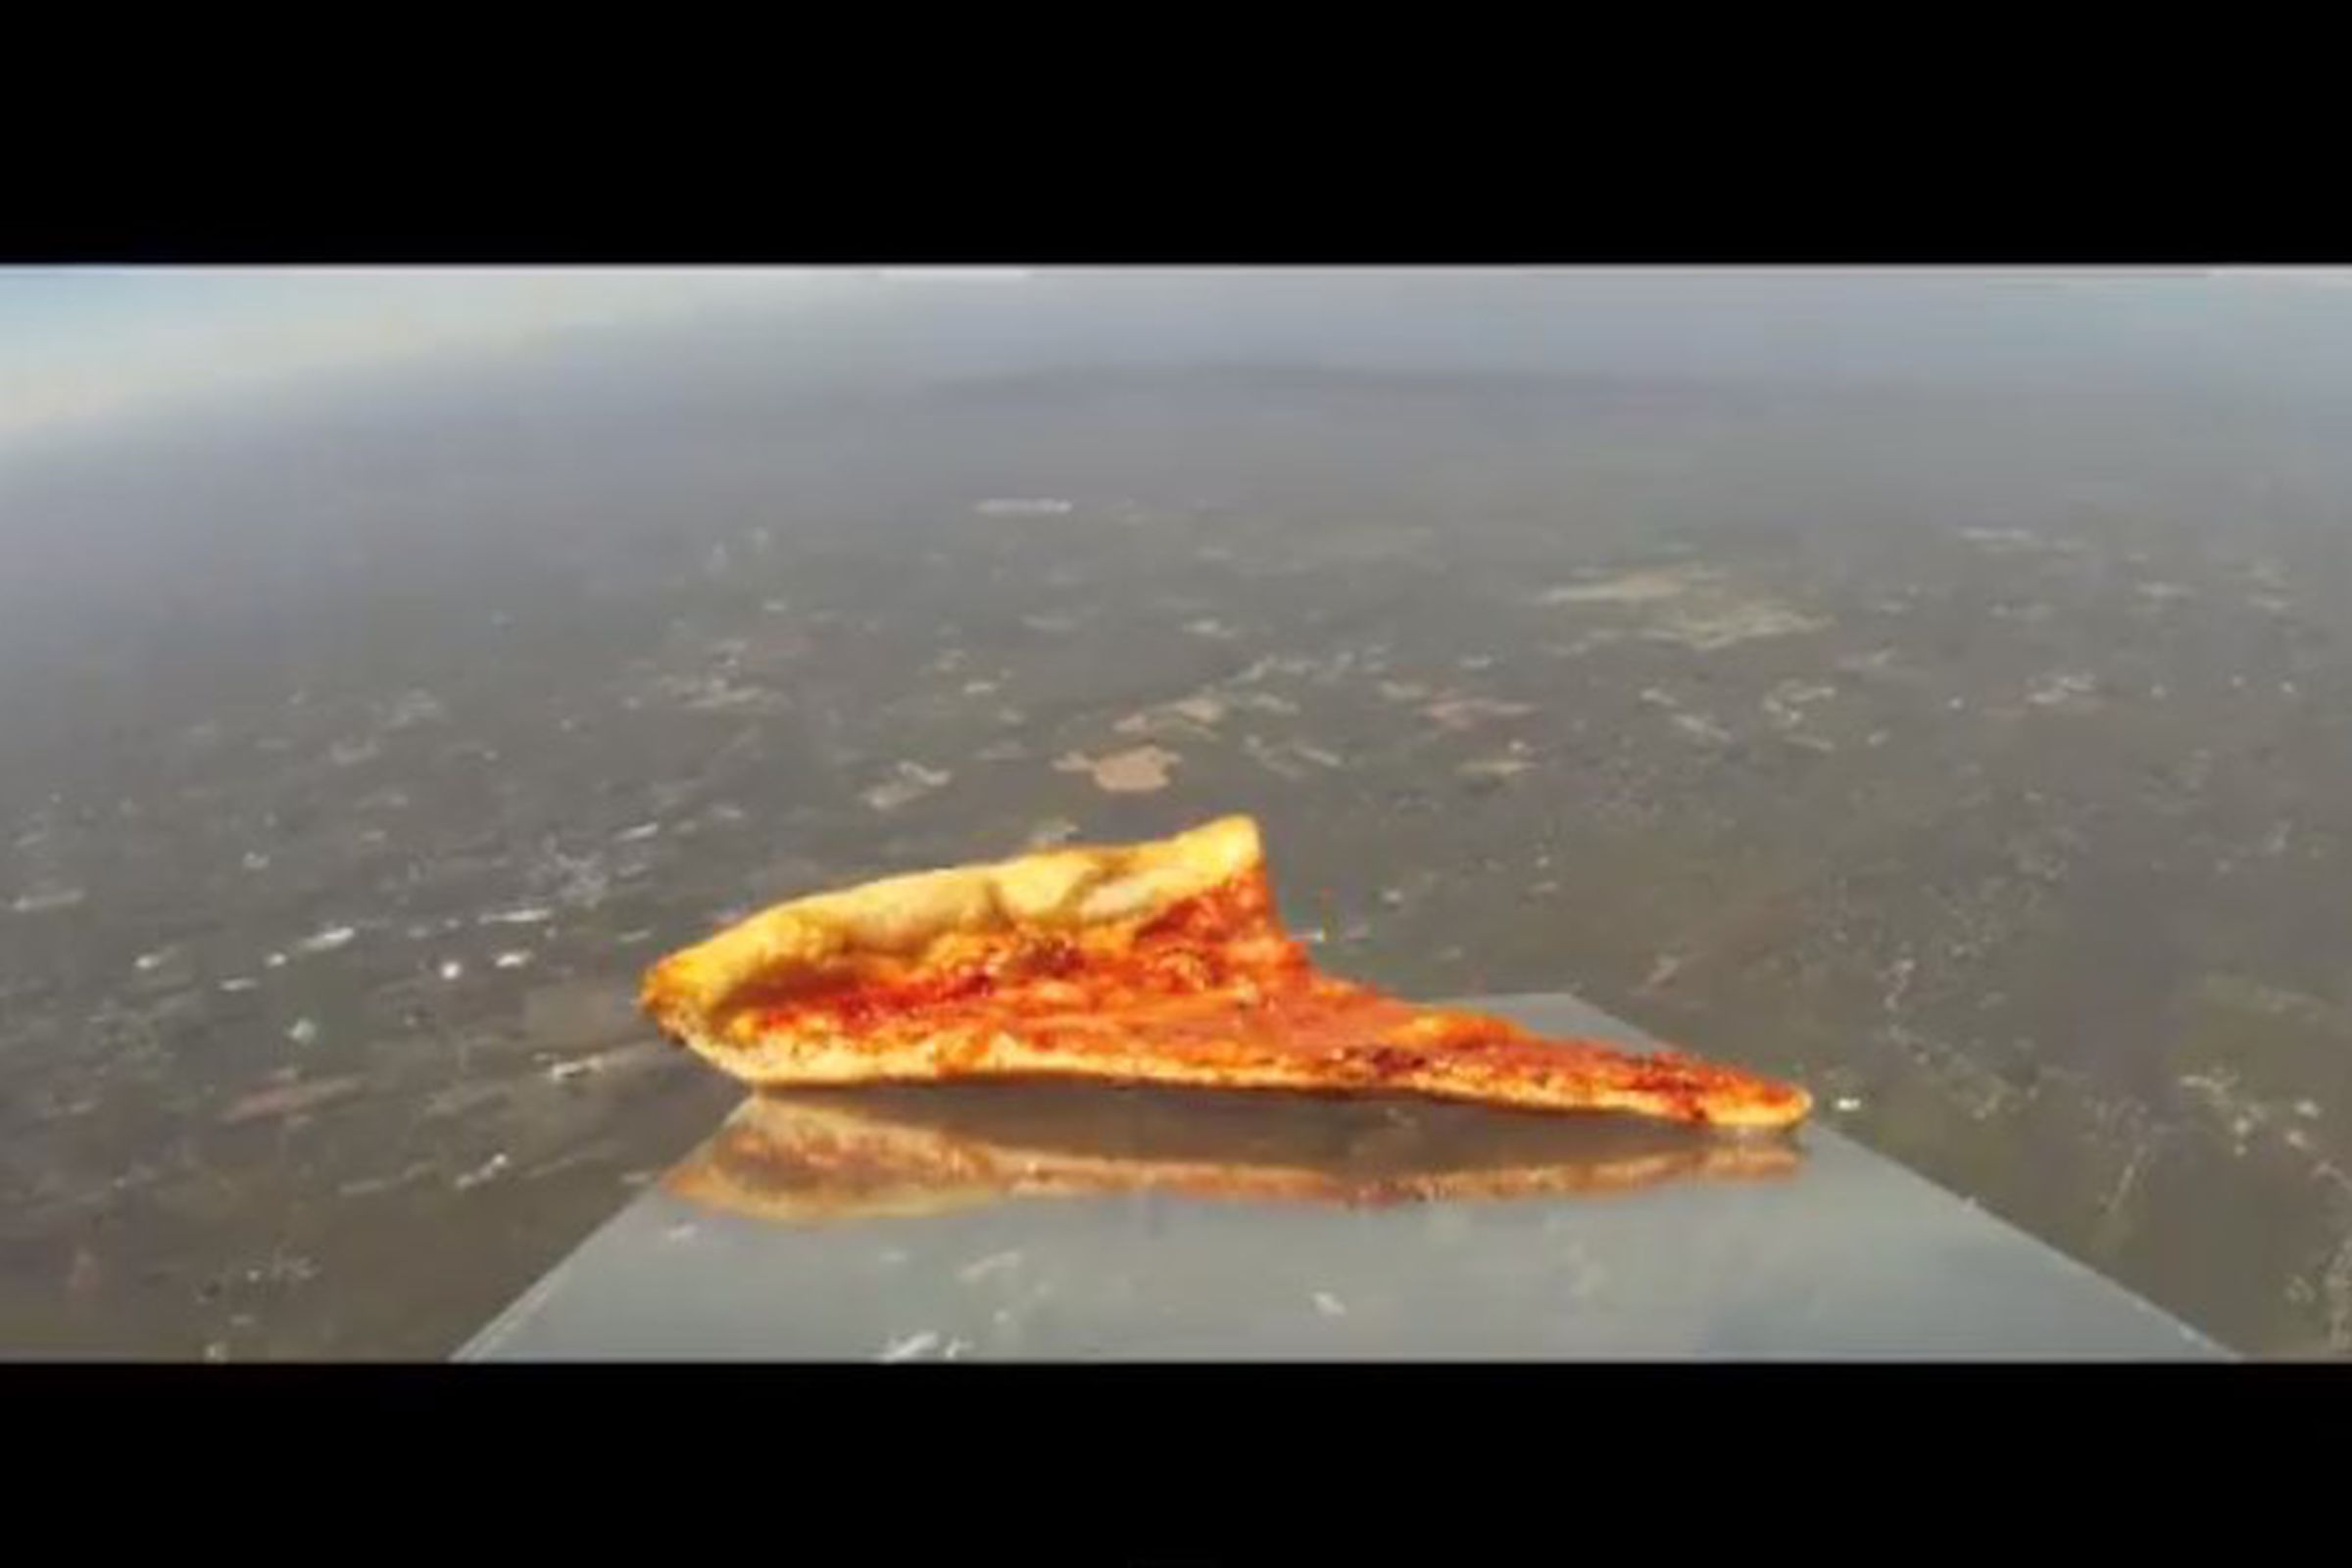 Space pizza